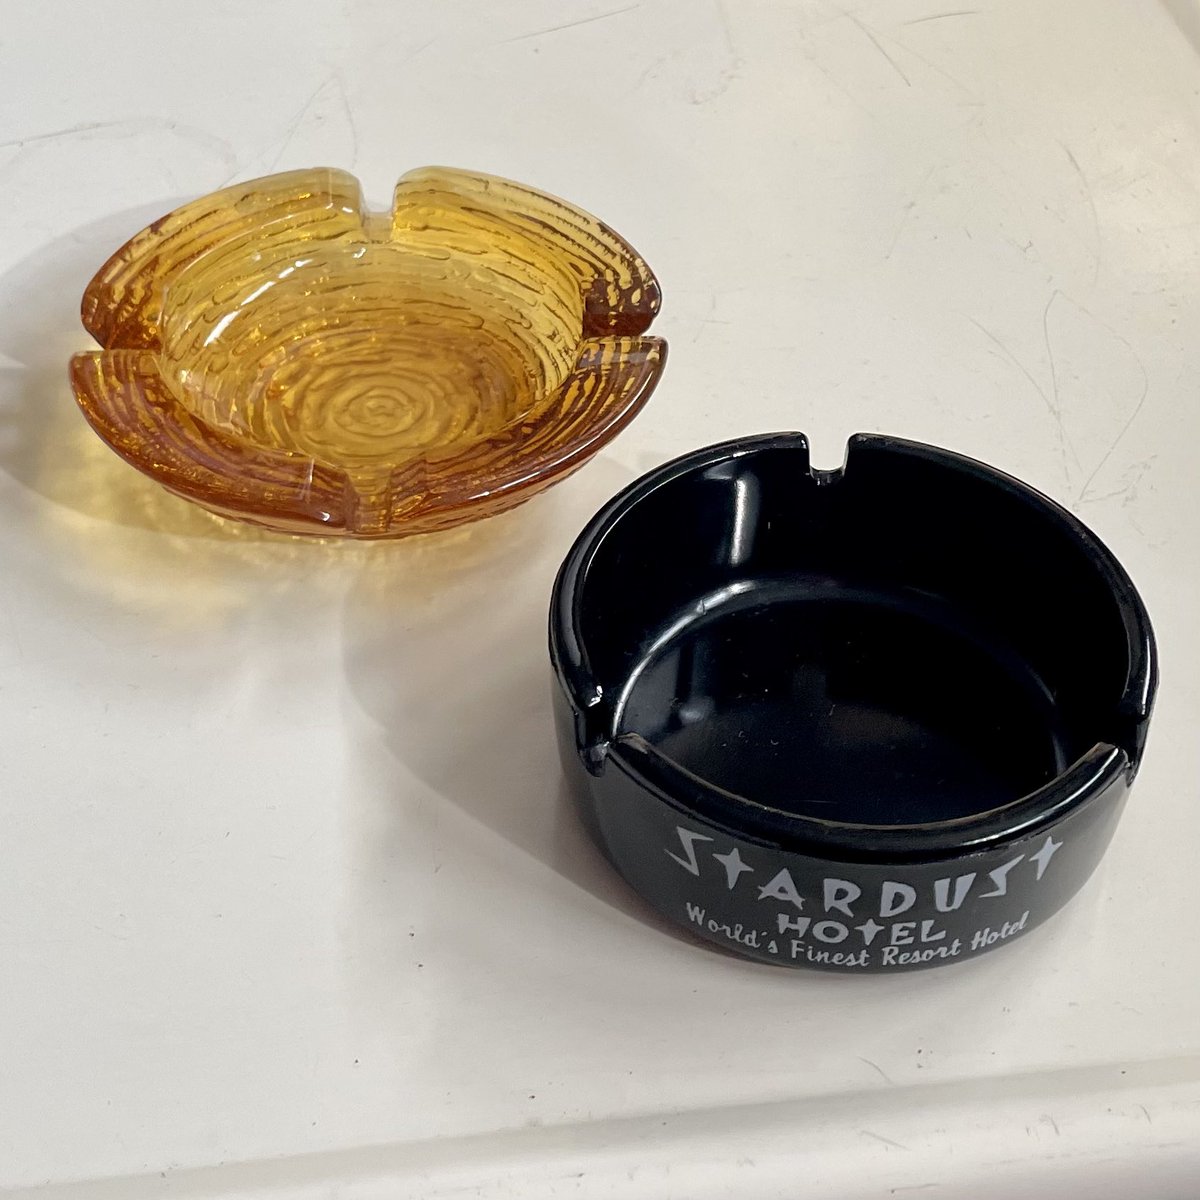 Check out today’s items to find at the @PGHVintageMixer…we have a terrific selection of #vintageashtrays…whether you’re looking for #kitschy, beautiful, or practical…one of these would look great in your living room, game room, office, etc. #vintage #pittsburgh #ashtray